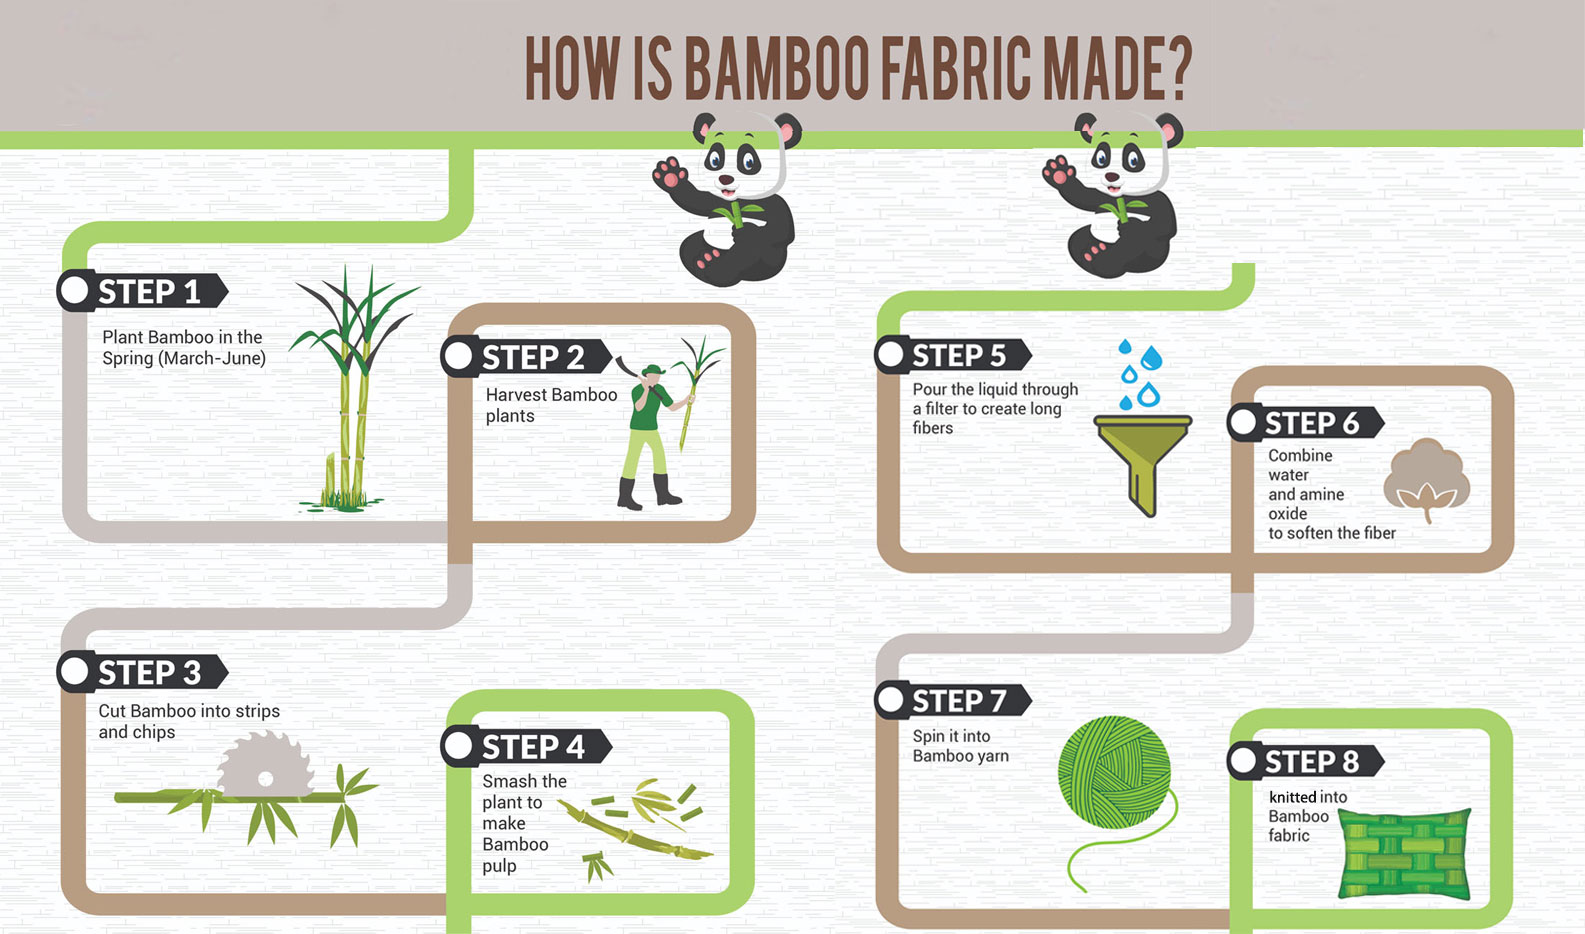 What bamboo